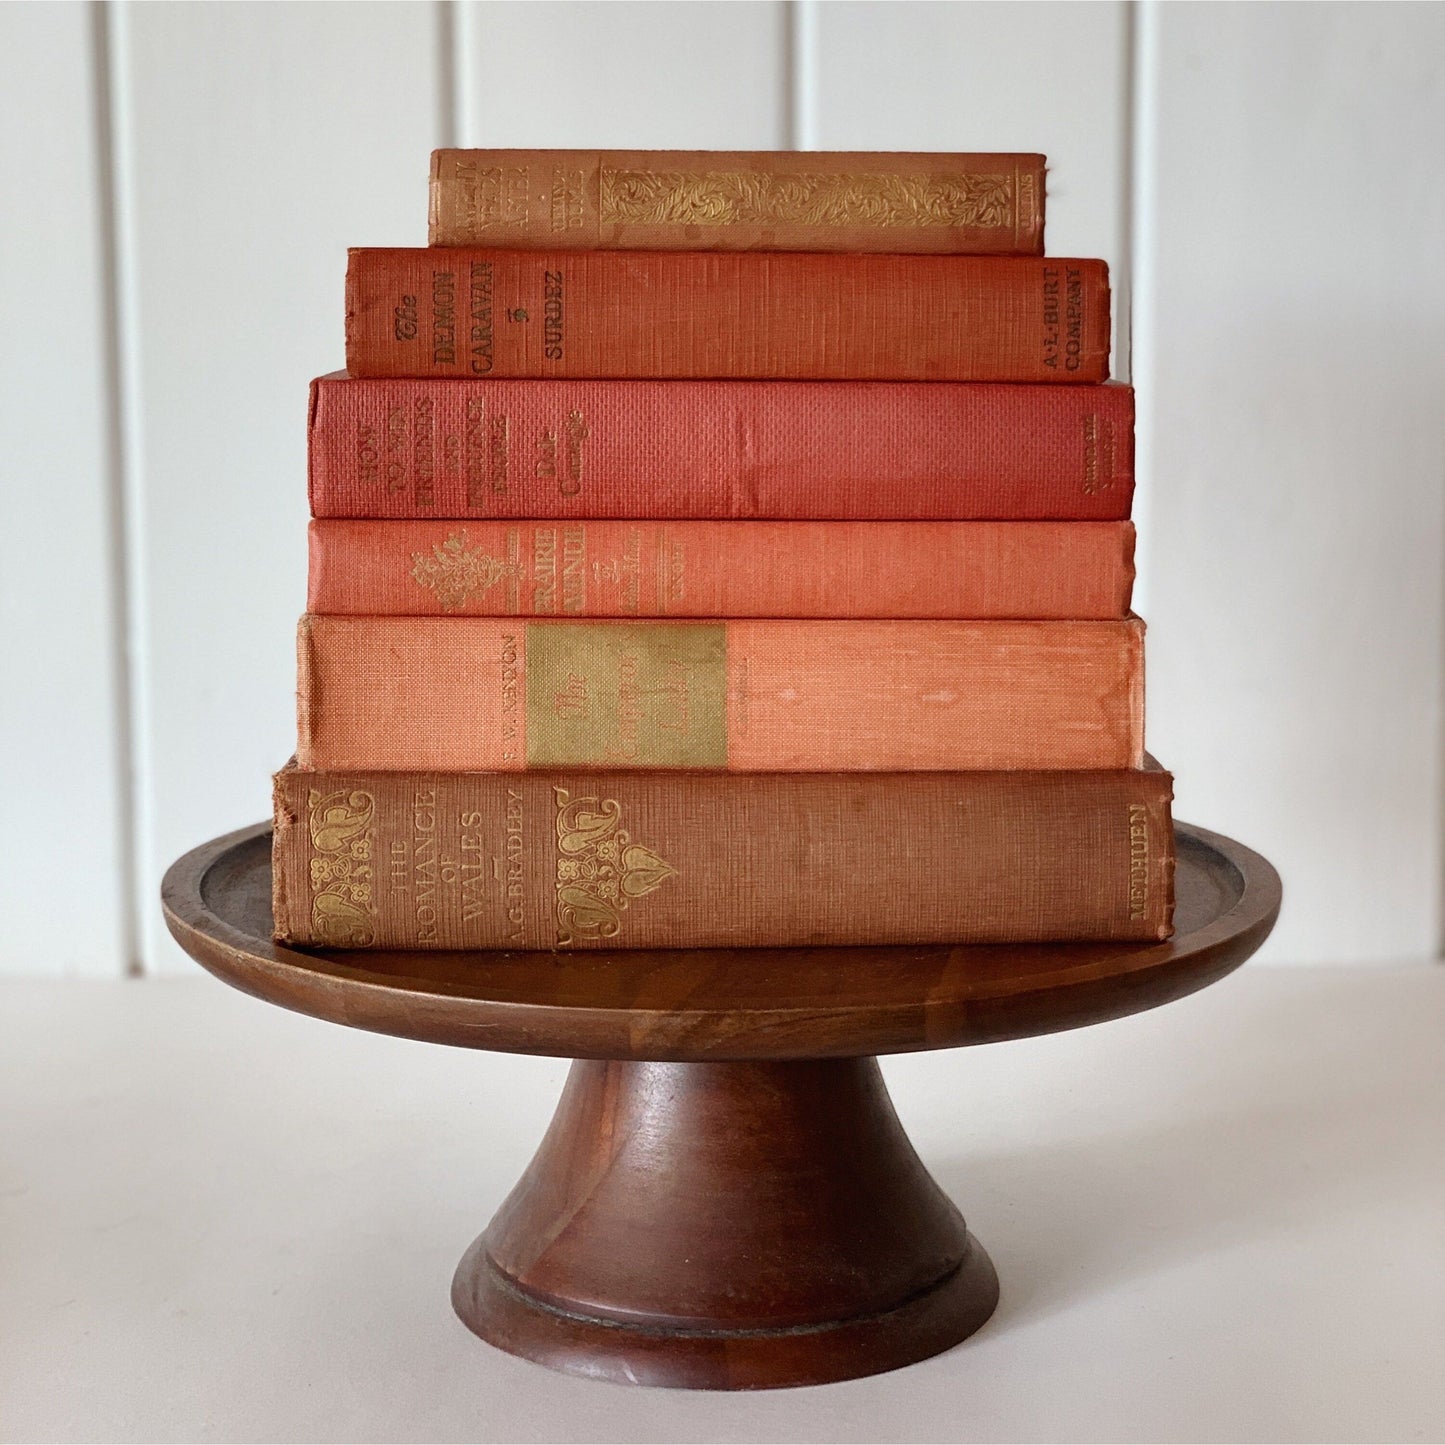 Peach - Coral - Red Vintage Books for Shelf Styling, Books By Color